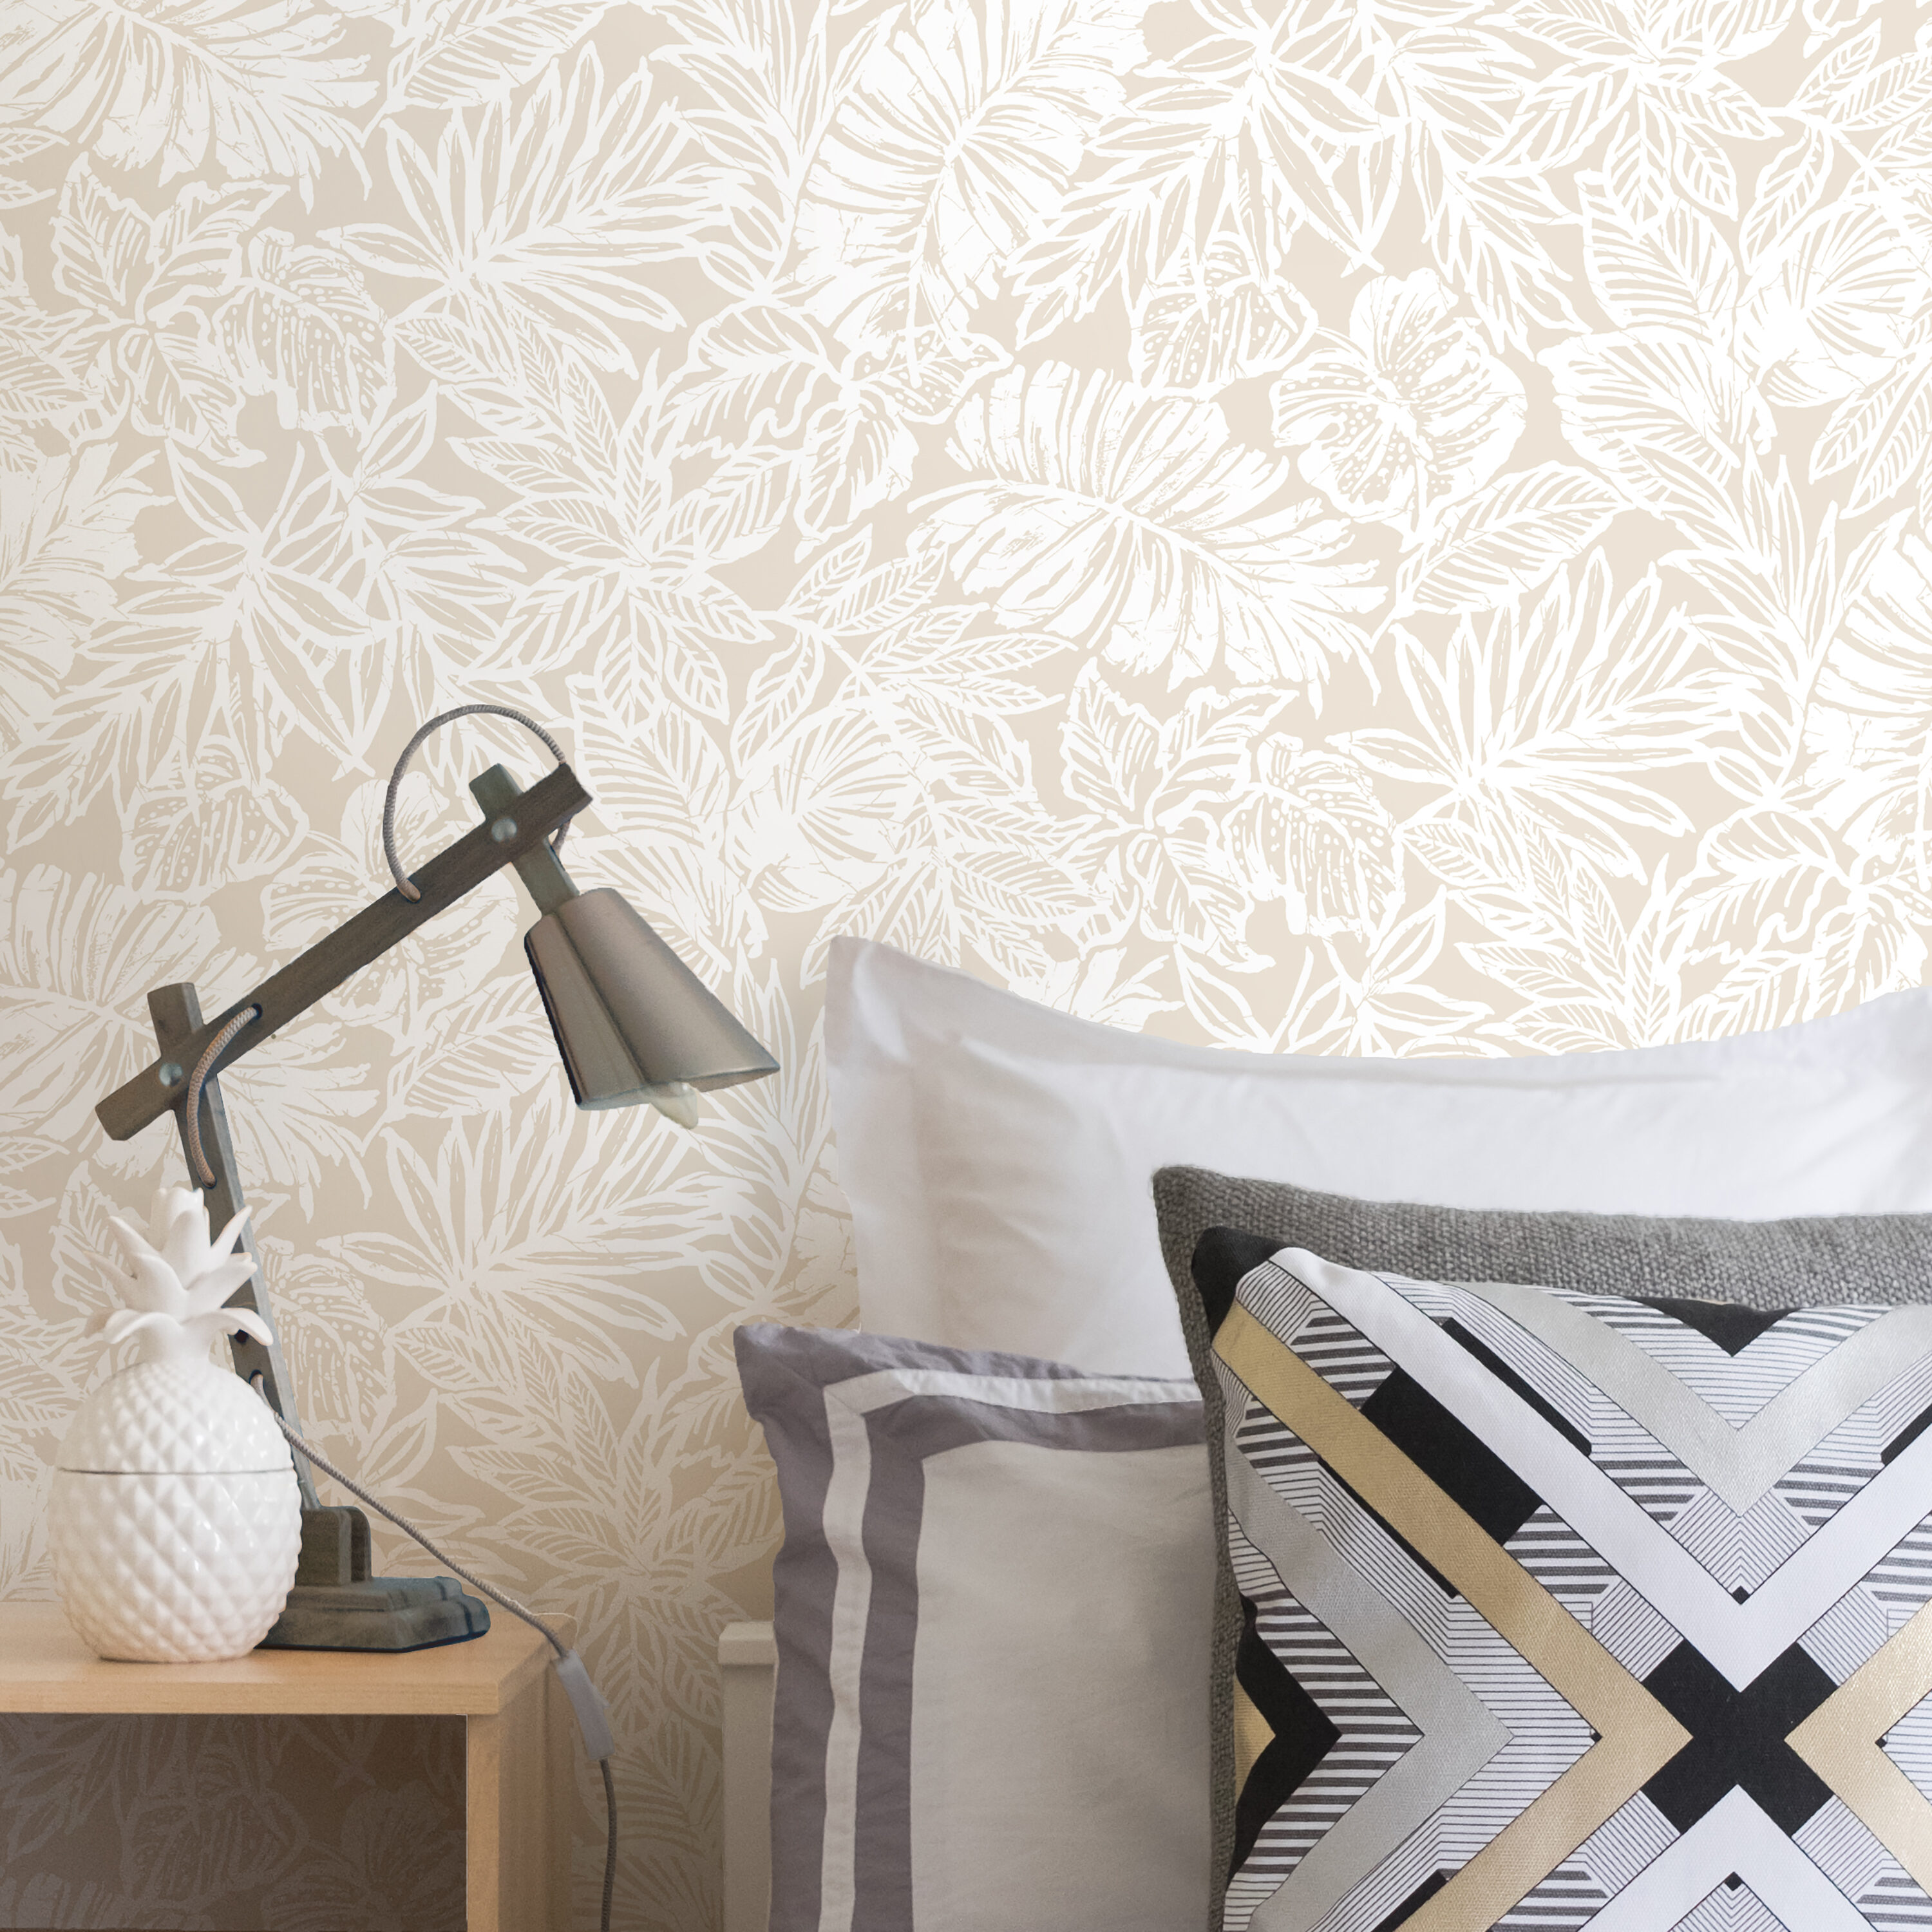 RoomMates Gold Leaf Peel and Stick Wallpaper Silver